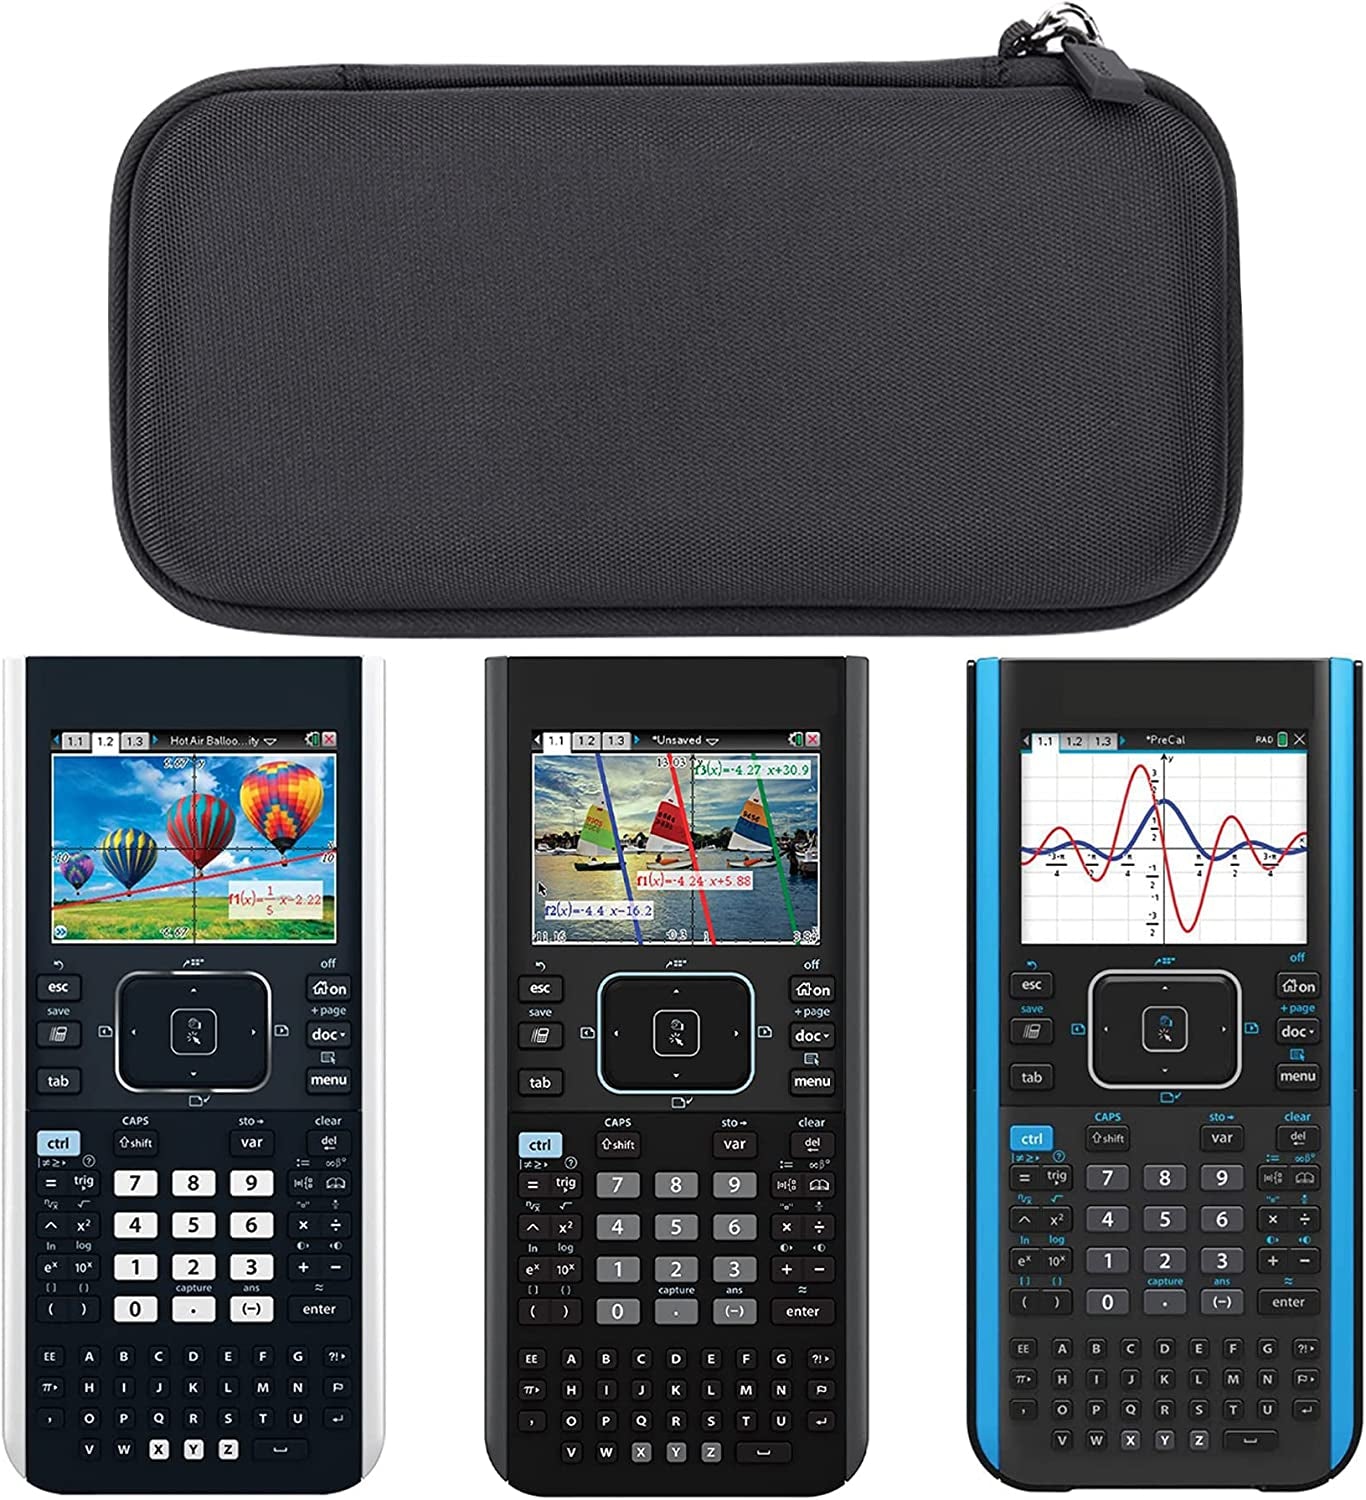 Hard Case Replacement for Texas Instruments TI-84 plus CE/TI-84 Plus/Ti-84 / TI-83 Plus/Ti-83 / TI-89 Titanium/Ti-85 / TI-86 / Nspire CX Cas/Ti-Nspire CX II CAS Color Graphing Calculator